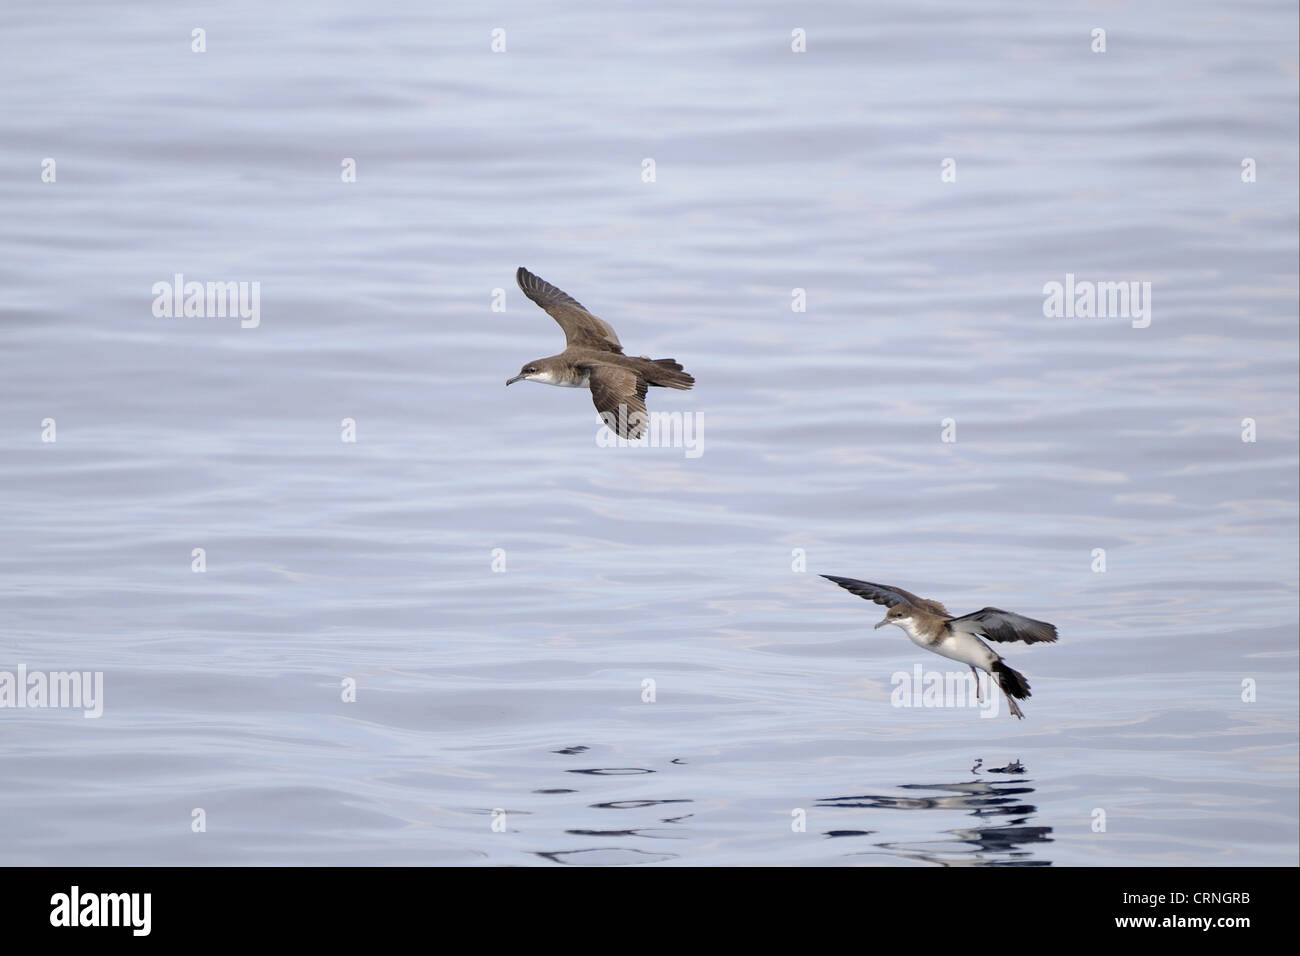 Tropical Shearwater (Puffinus bailloni) two adults, in flight, landing on water, Maldives, march Stock Photo